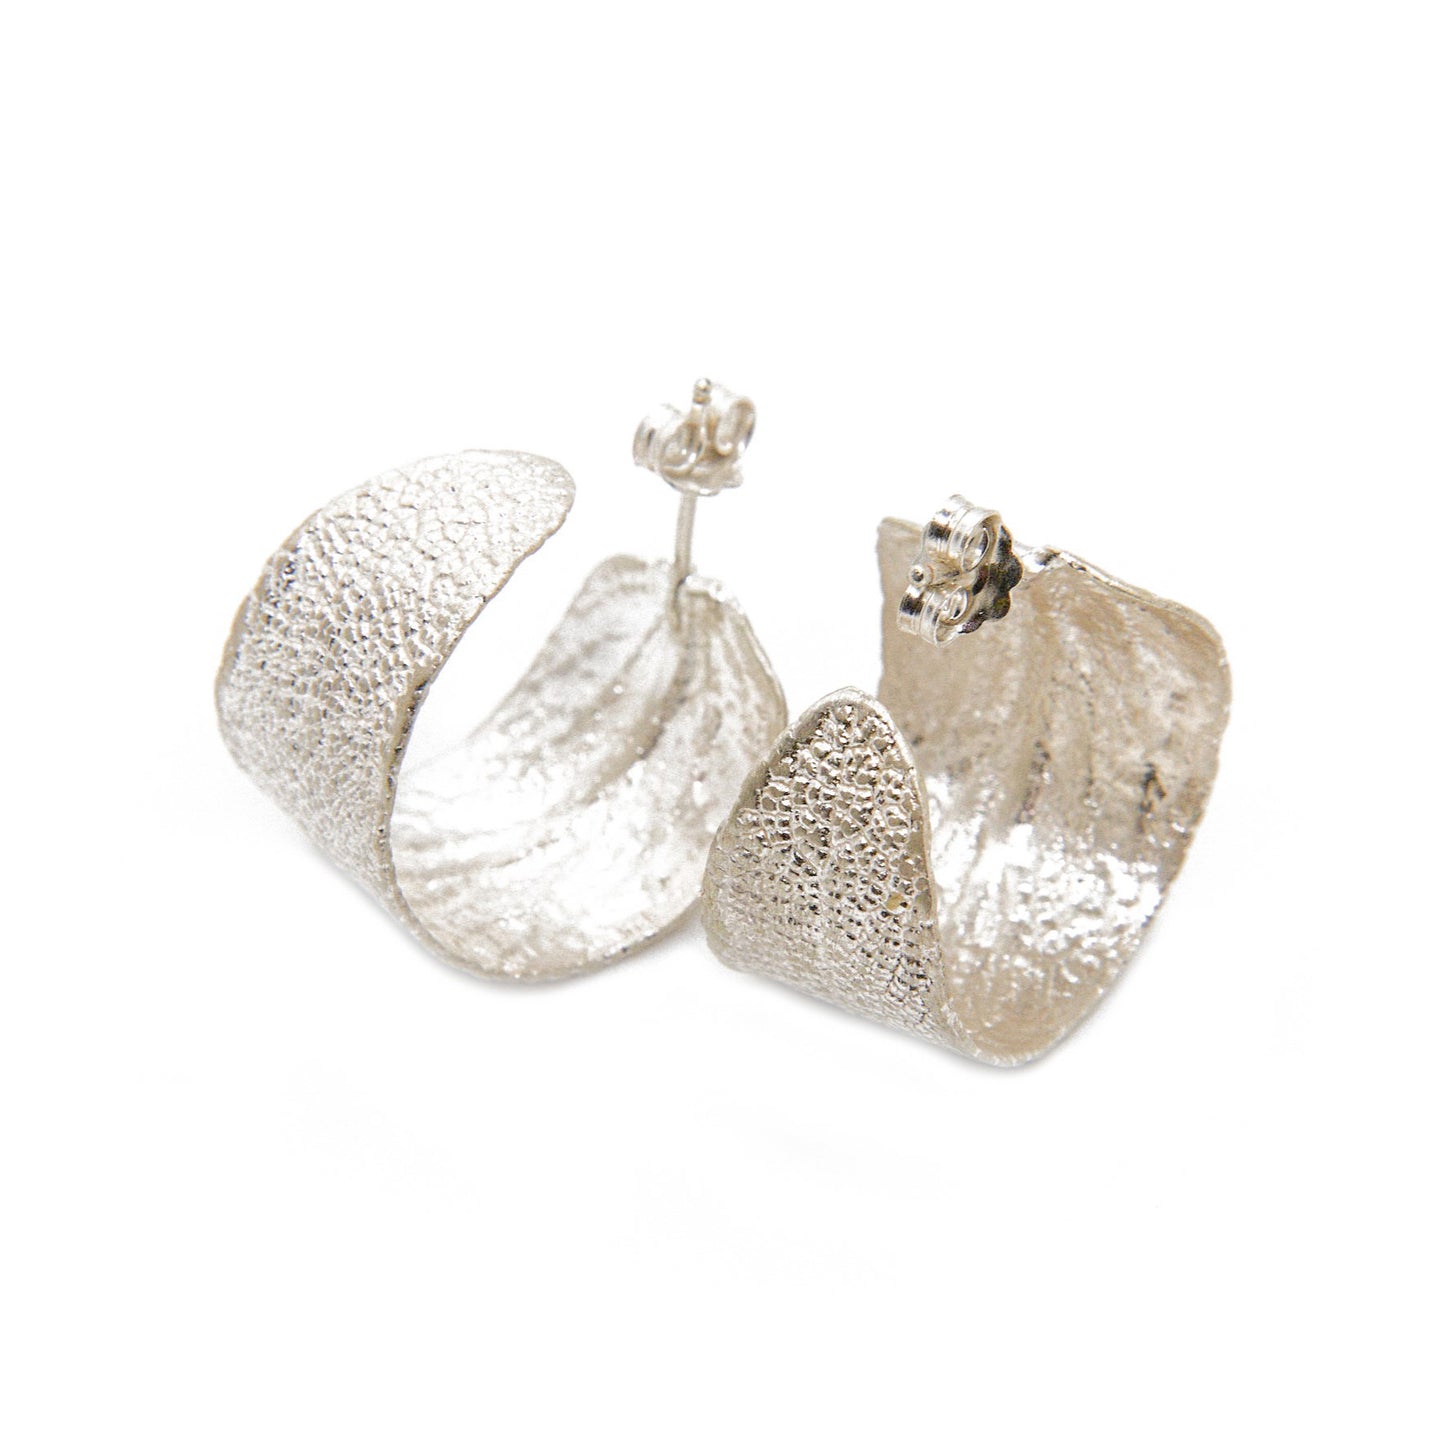 Sterling silver hoop earrings featuring real sage leaves, meticulously handcrafted in Greece, a fusion of nature's beauty and artisanal excellence.